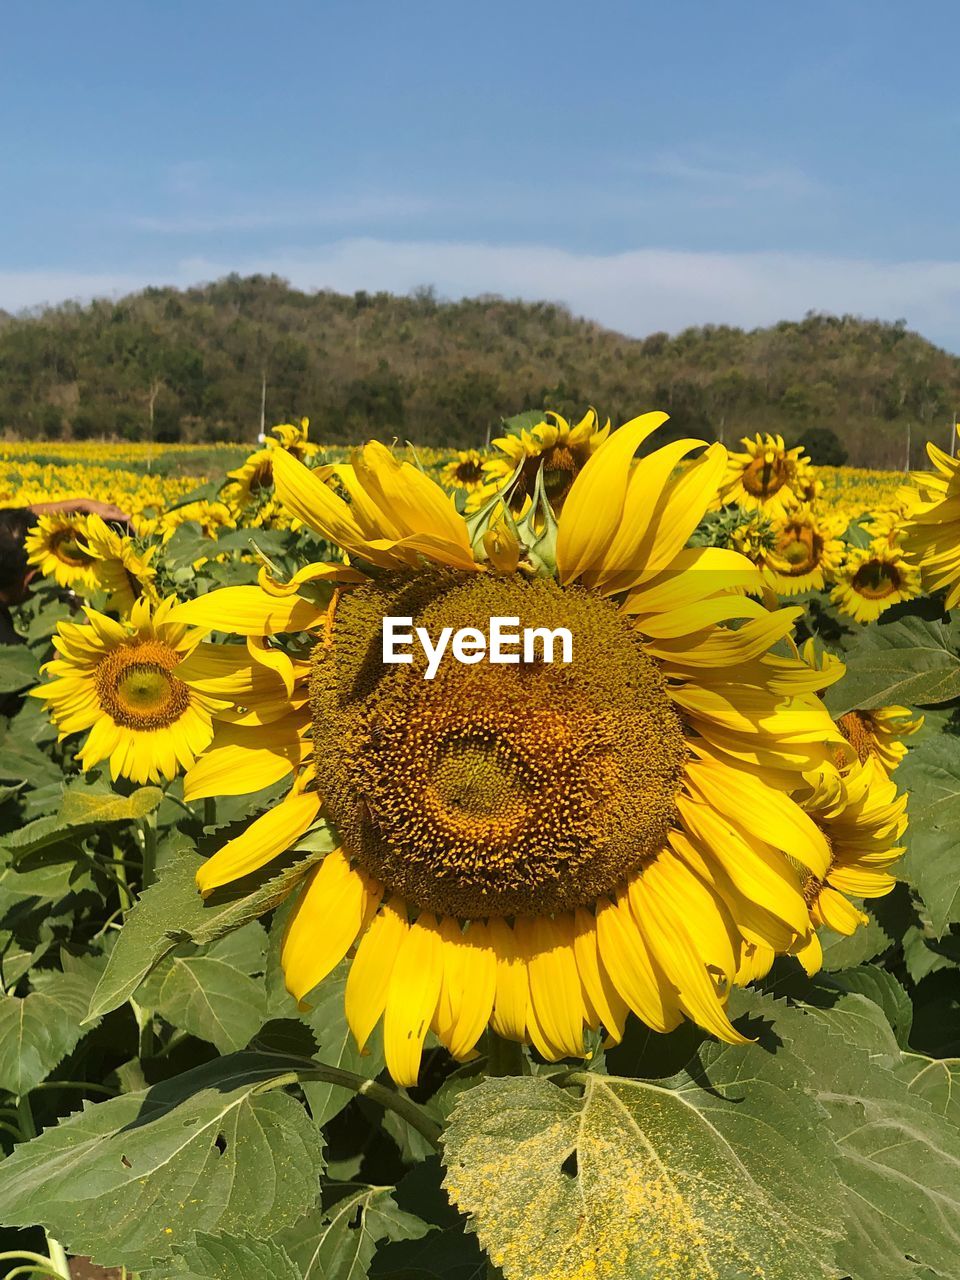 CLOSE-UP OF YELLOW SUNFLOWERS ON FIELD